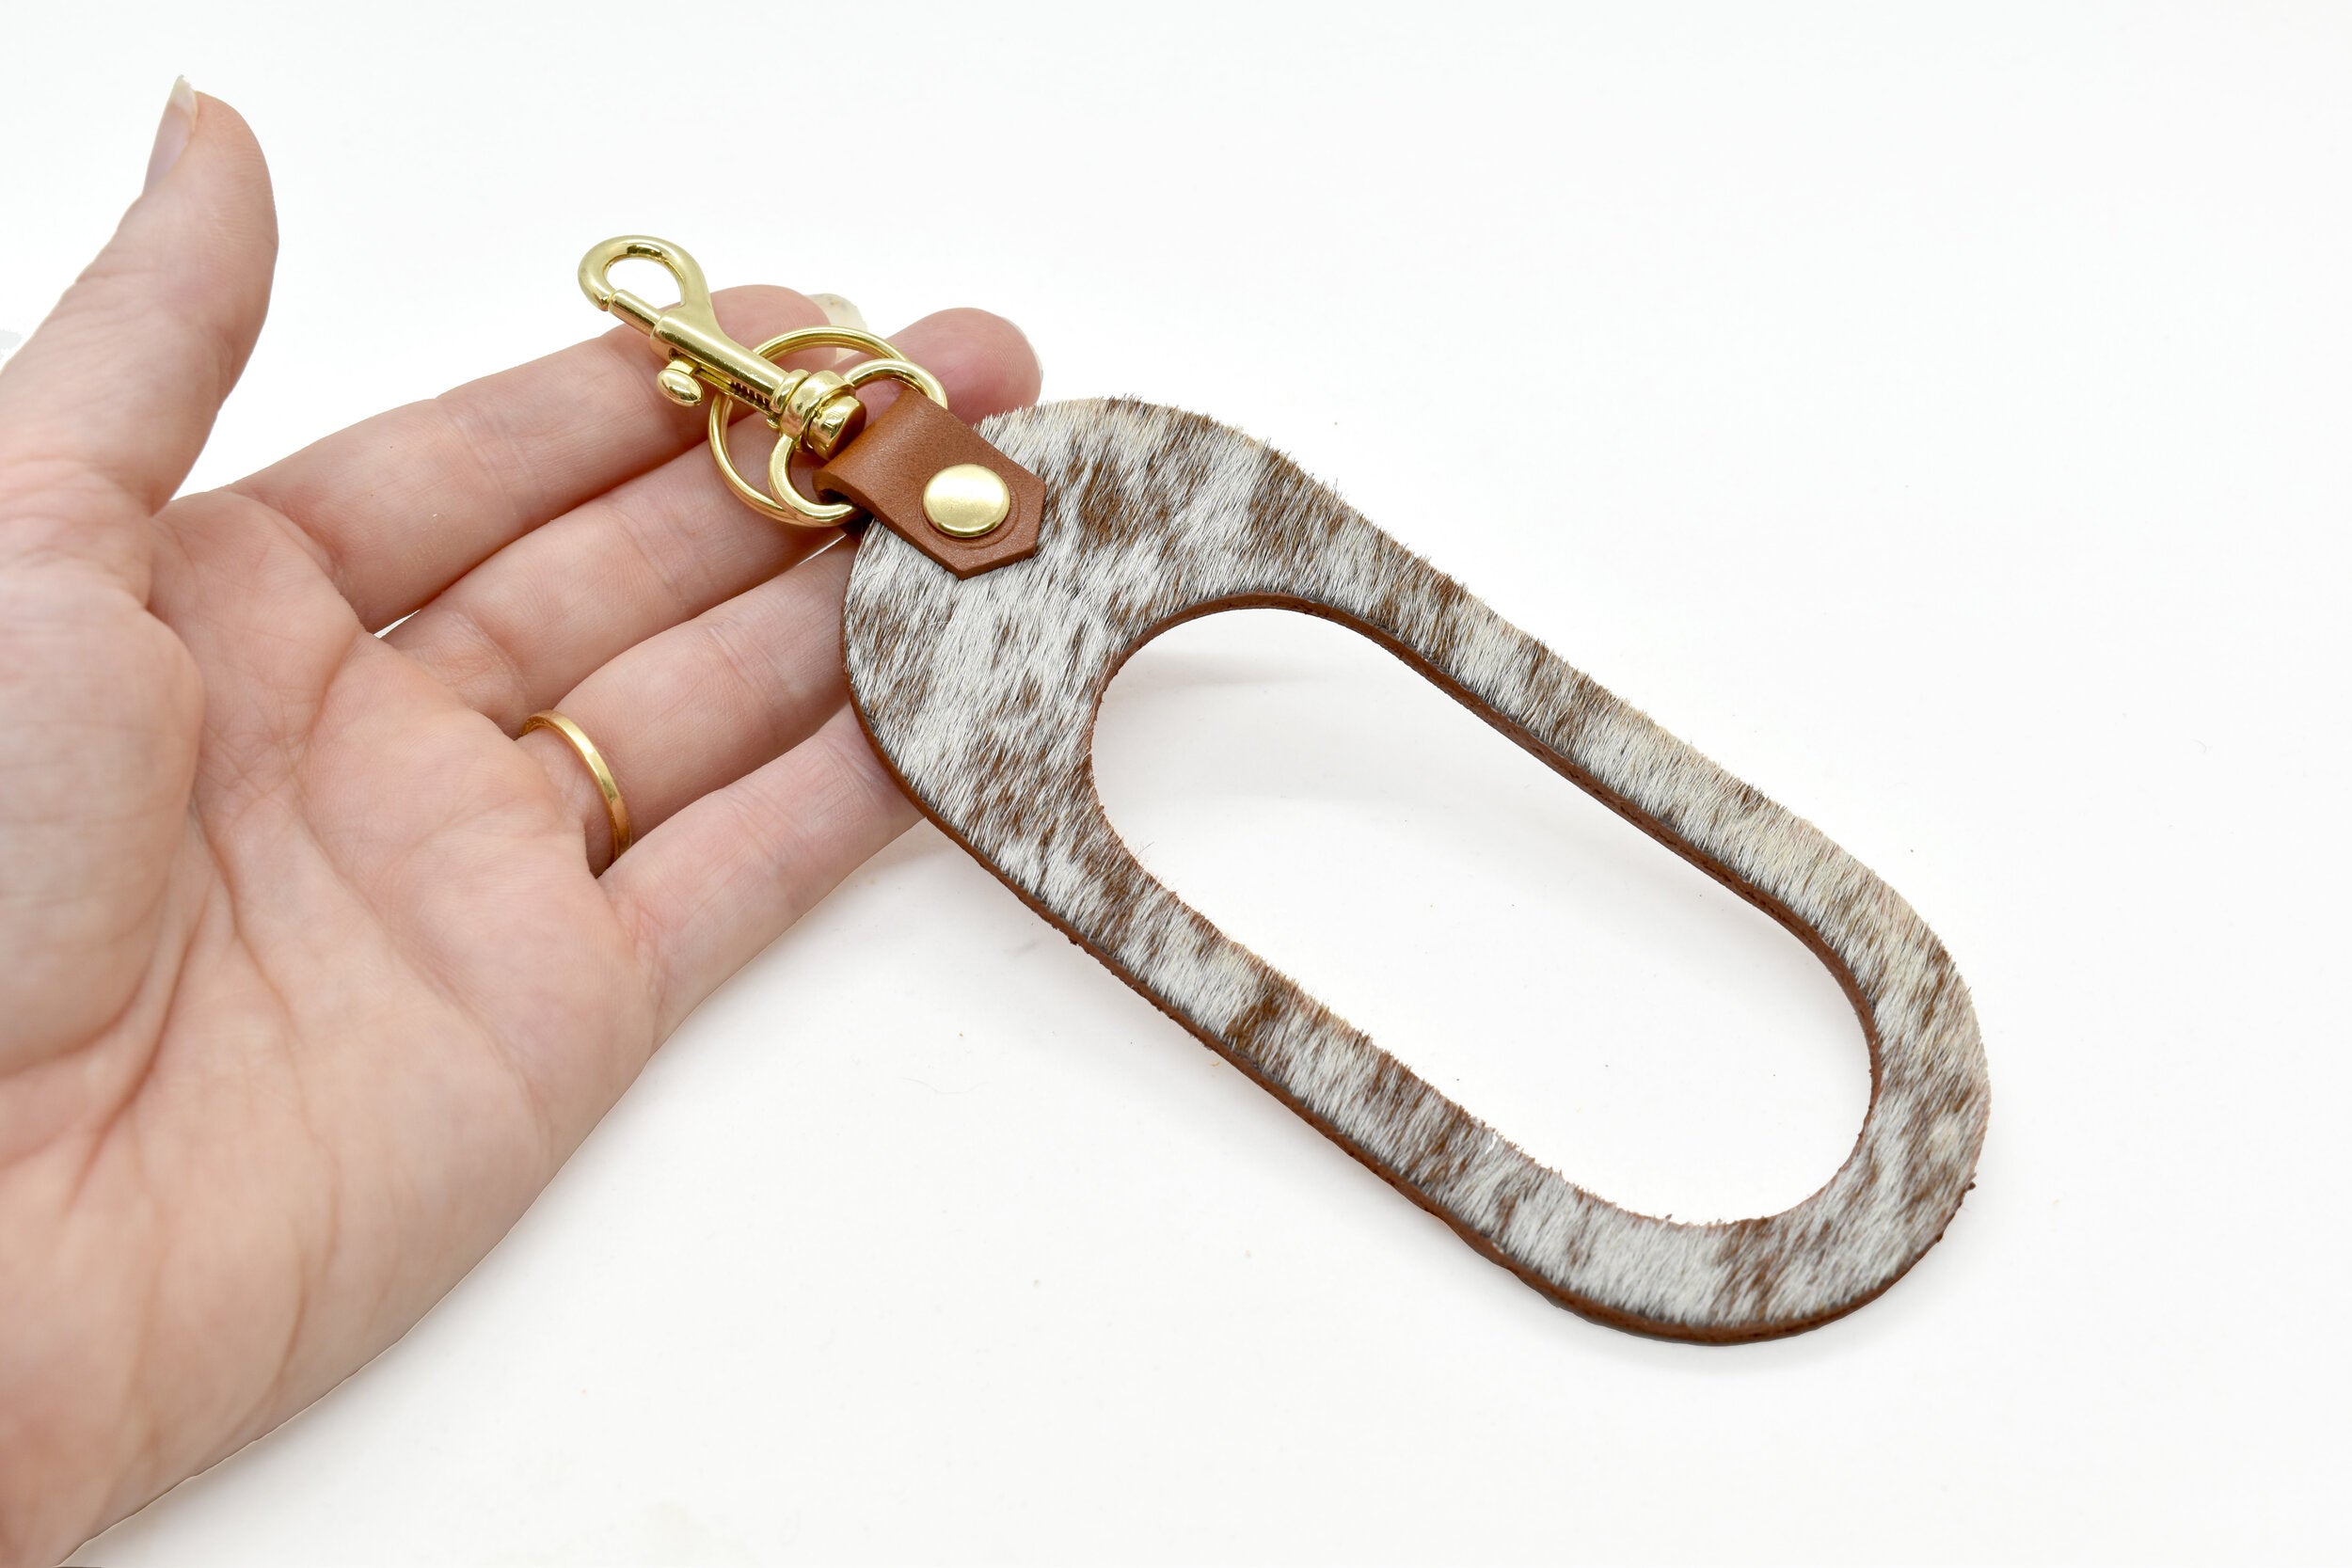 hand holding the cut out leather key chain in smooth chestnut saddle leather and chestnut brown hair on hide.